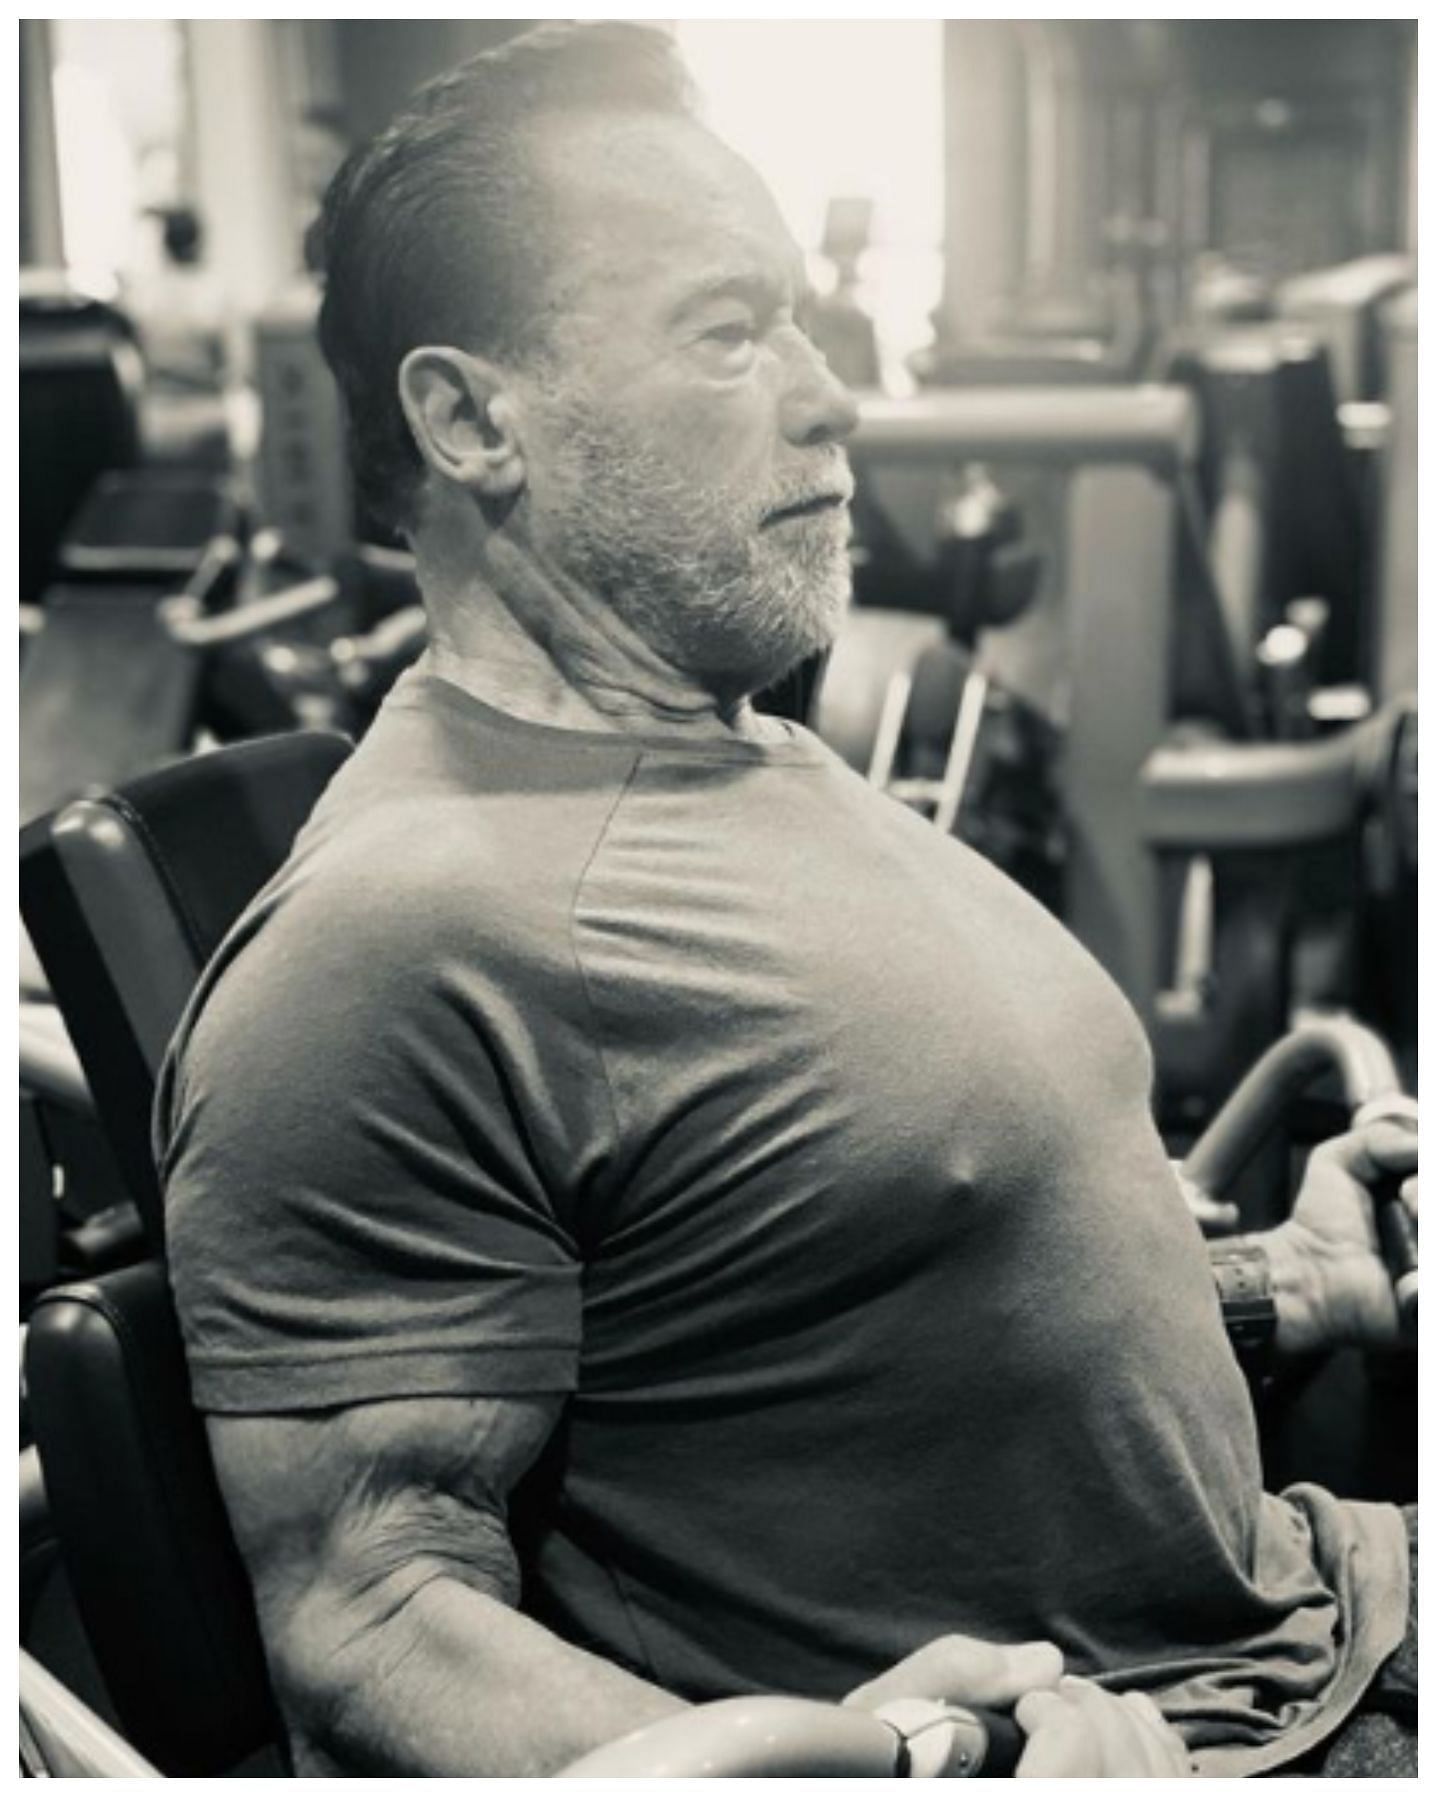 Arnold Schwarzenegger has been one of the most well-known and beloved bodybuilders for many decades. (Image via Instagram @ schwarzenegger)